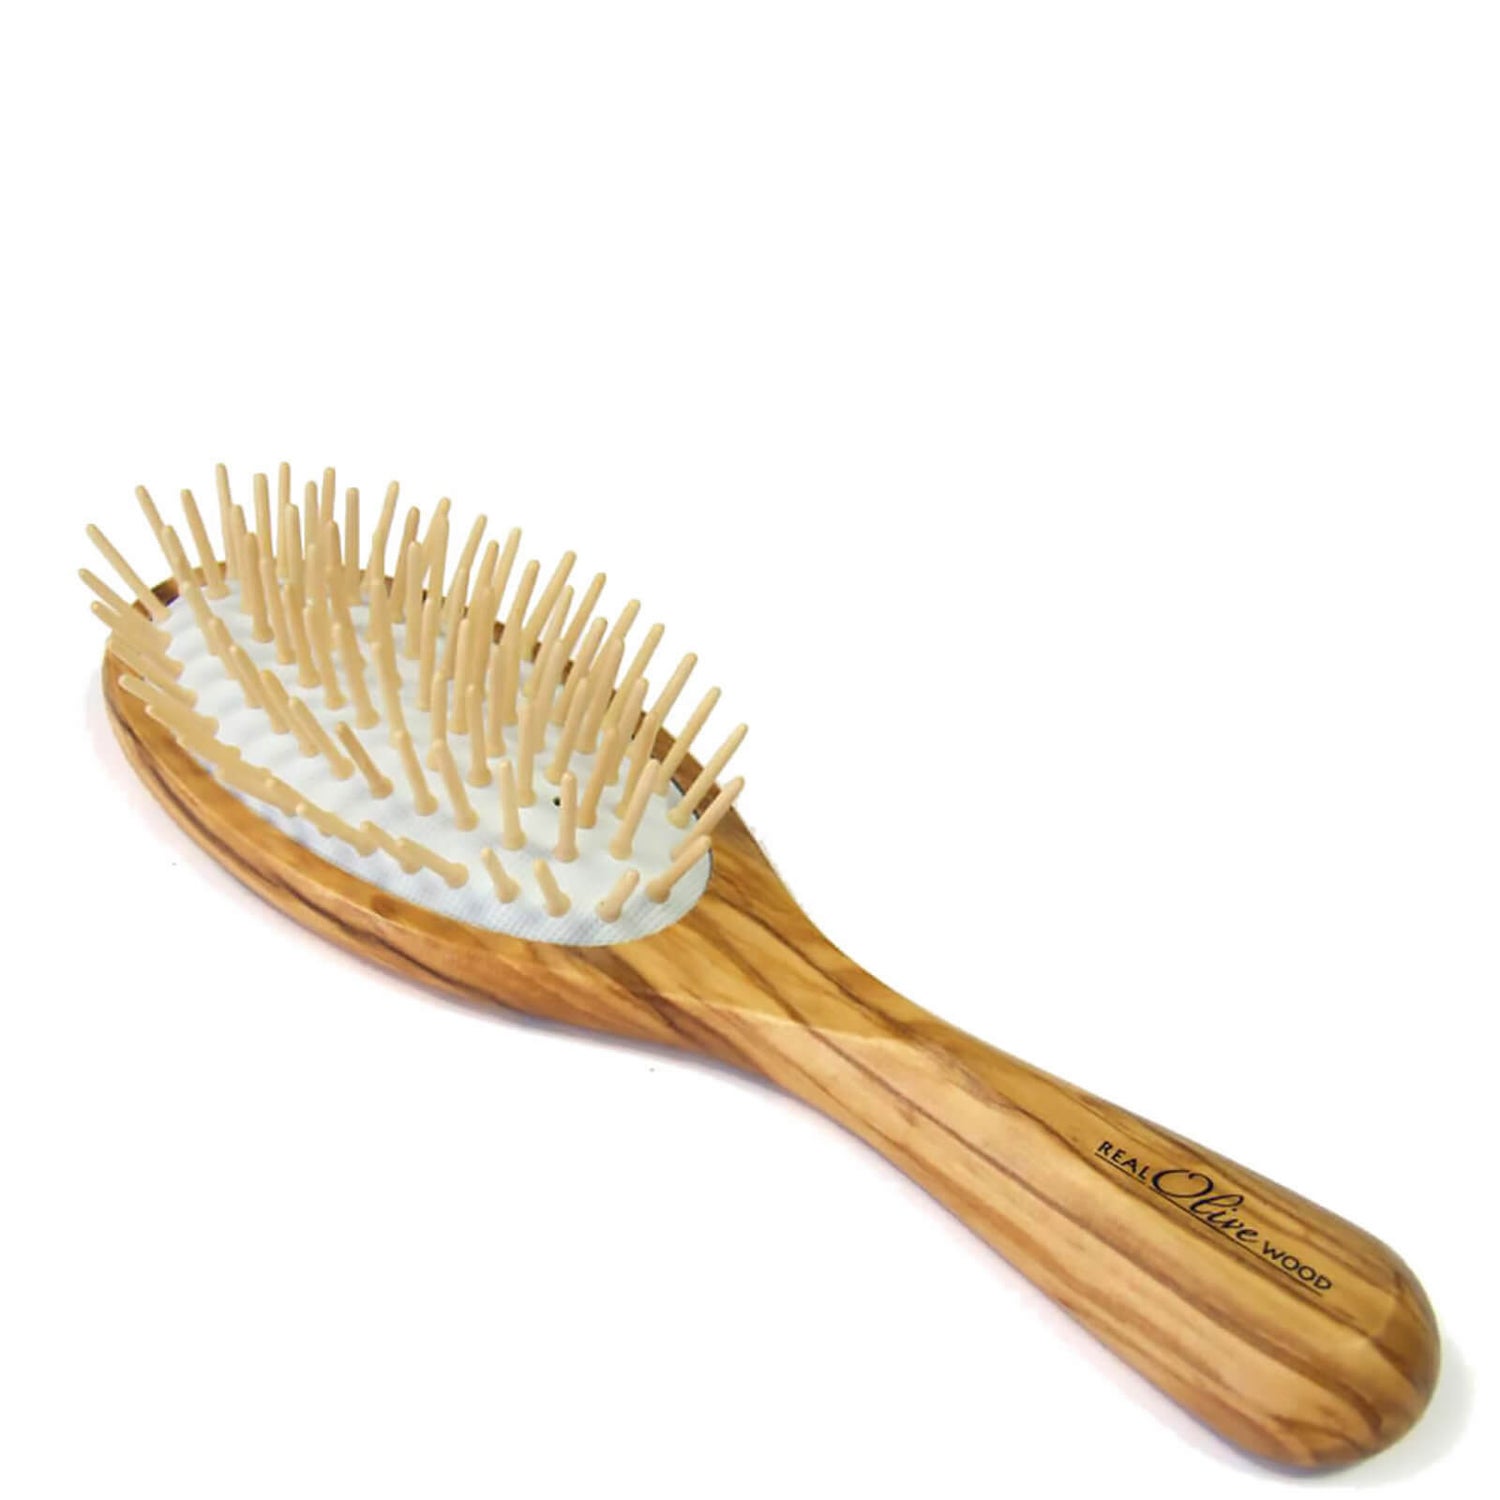 Hydrea London Olive Wood Anti Static Hair Brush - FREE Delivery